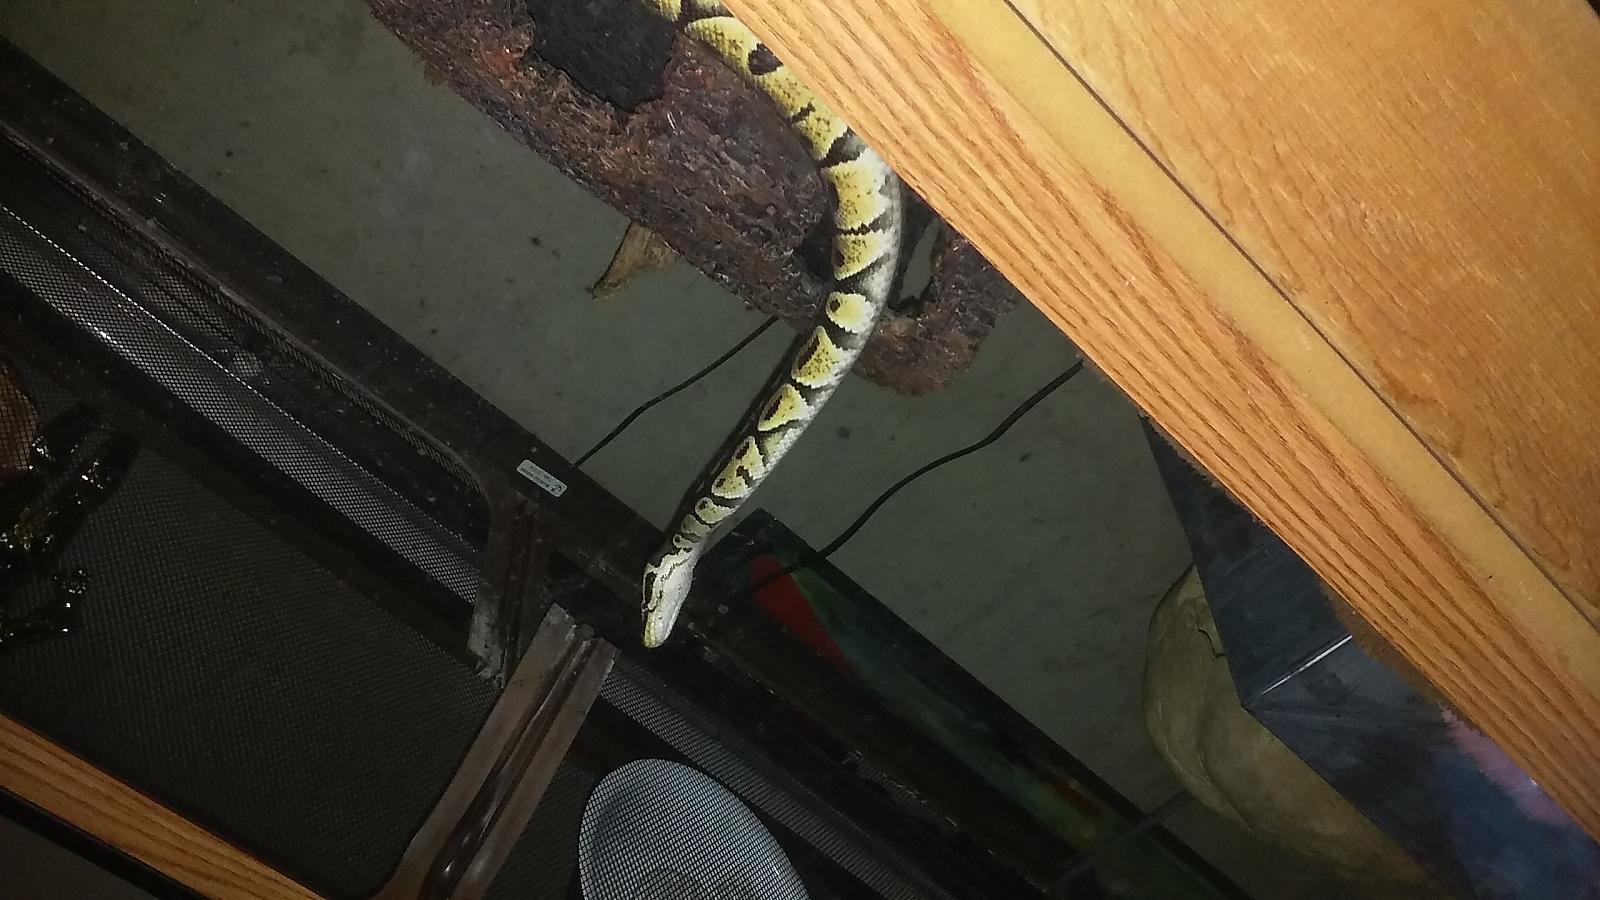 Noodle Baby Trying To Escape